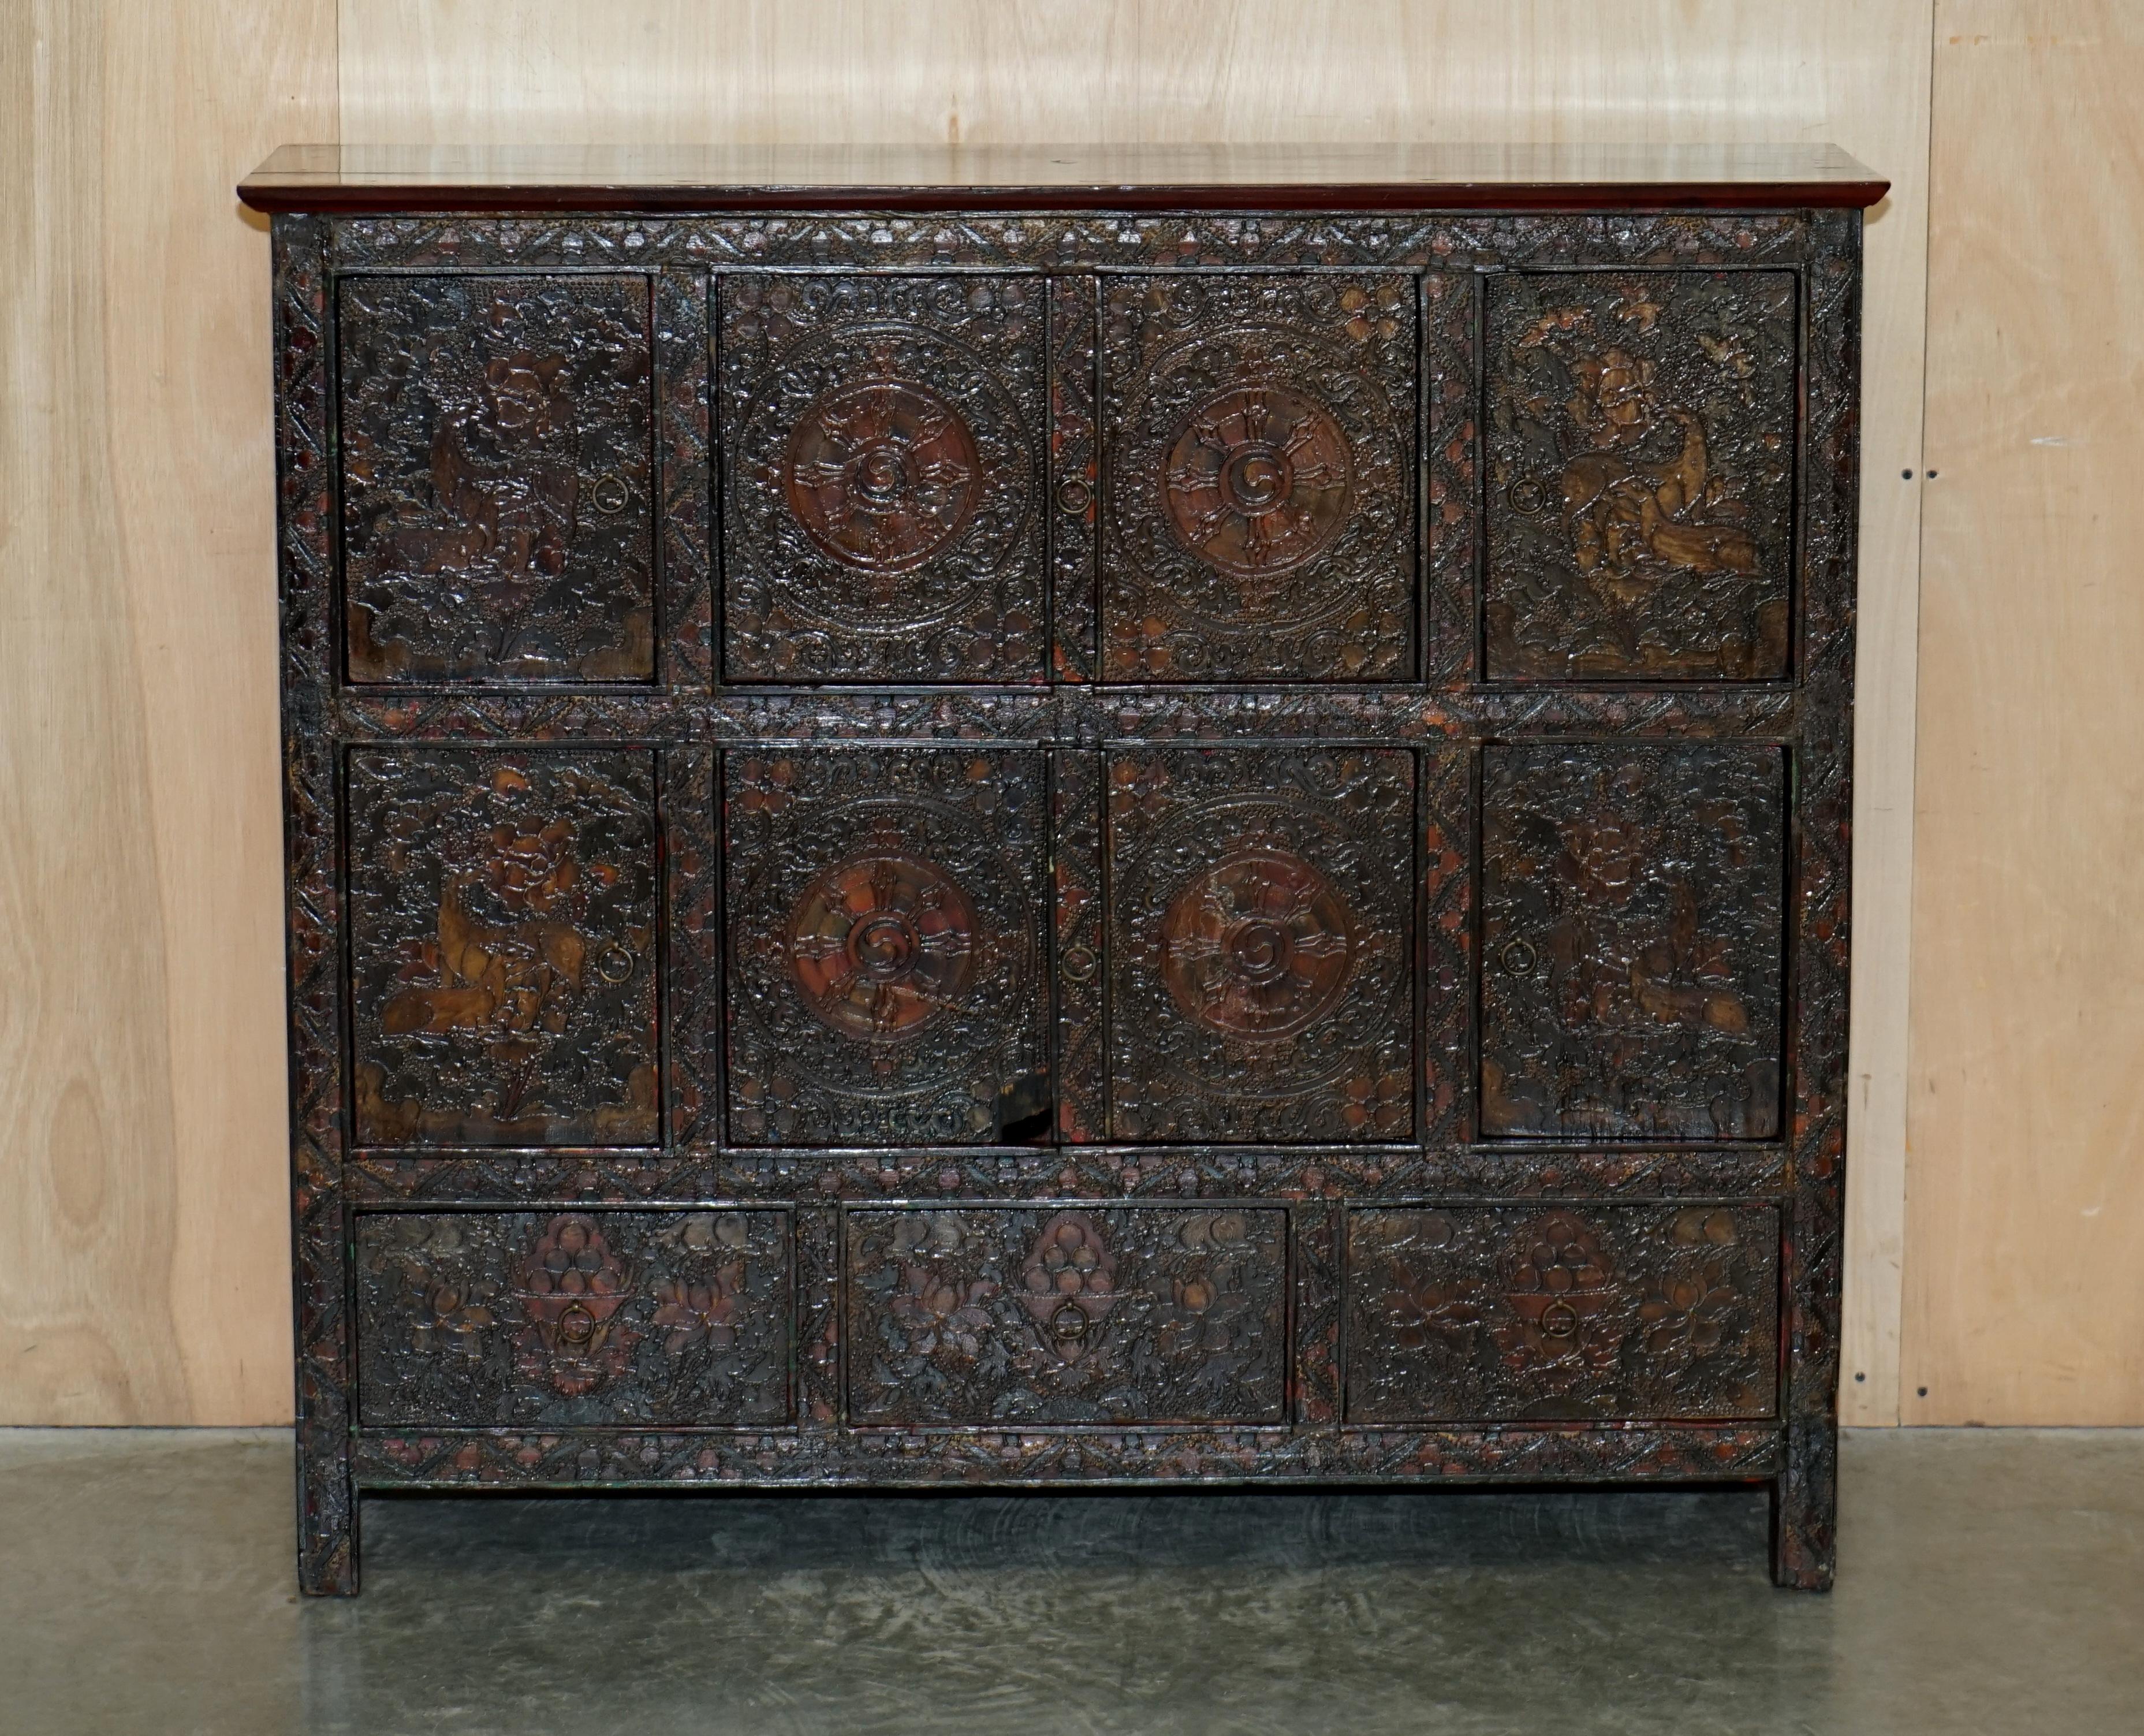 We are delighted to offer for sale this absolutely stunning, highly decorative, Antique Tibetan, Polychrome painted Altar cabinet with drawers depicting Deers & Potted plants

This is a very good looking and well made piece of art furniture. It is